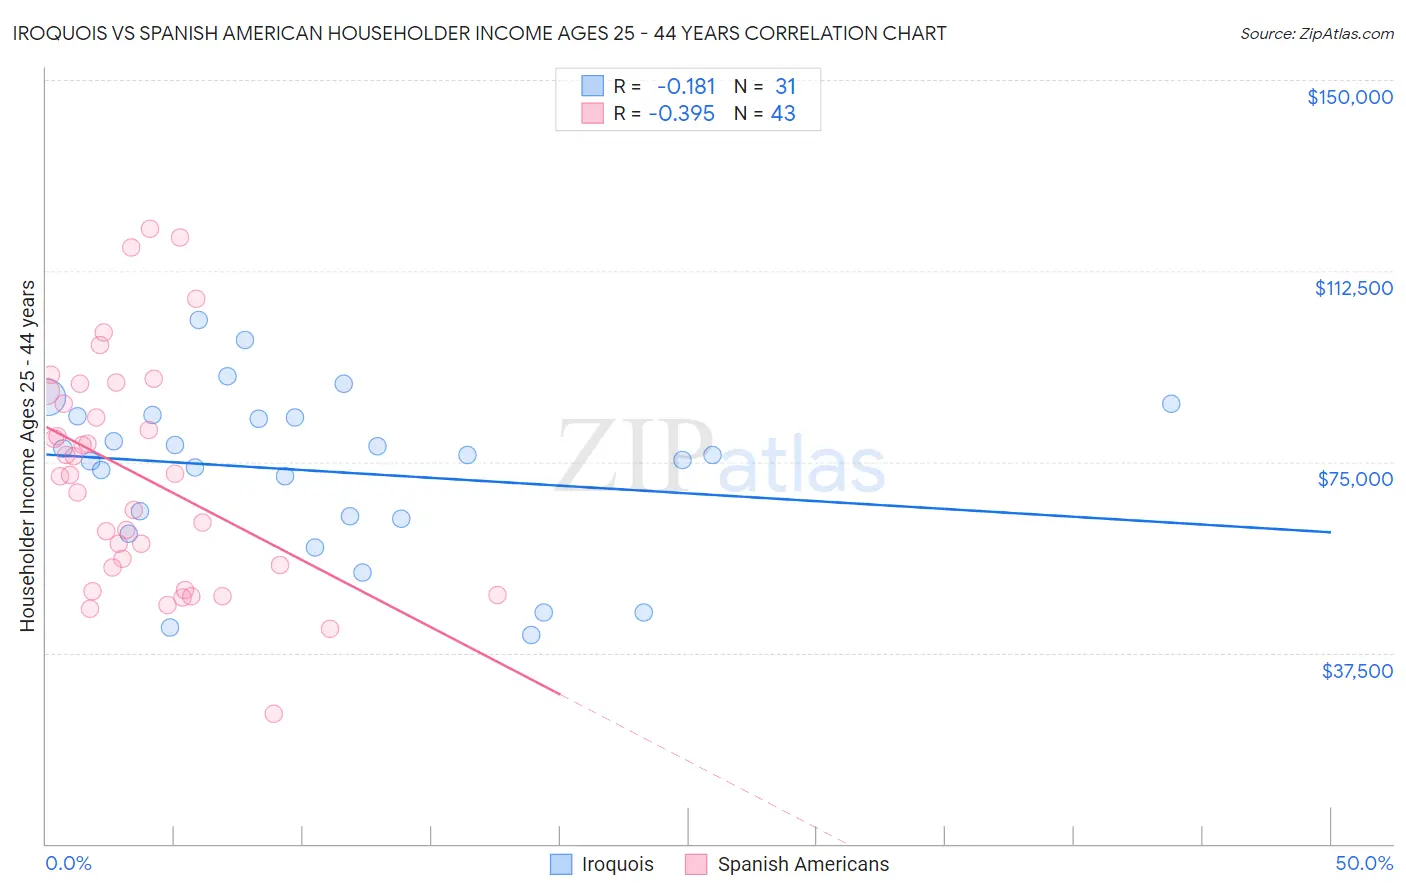 Iroquois vs Spanish American Householder Income Ages 25 - 44 years